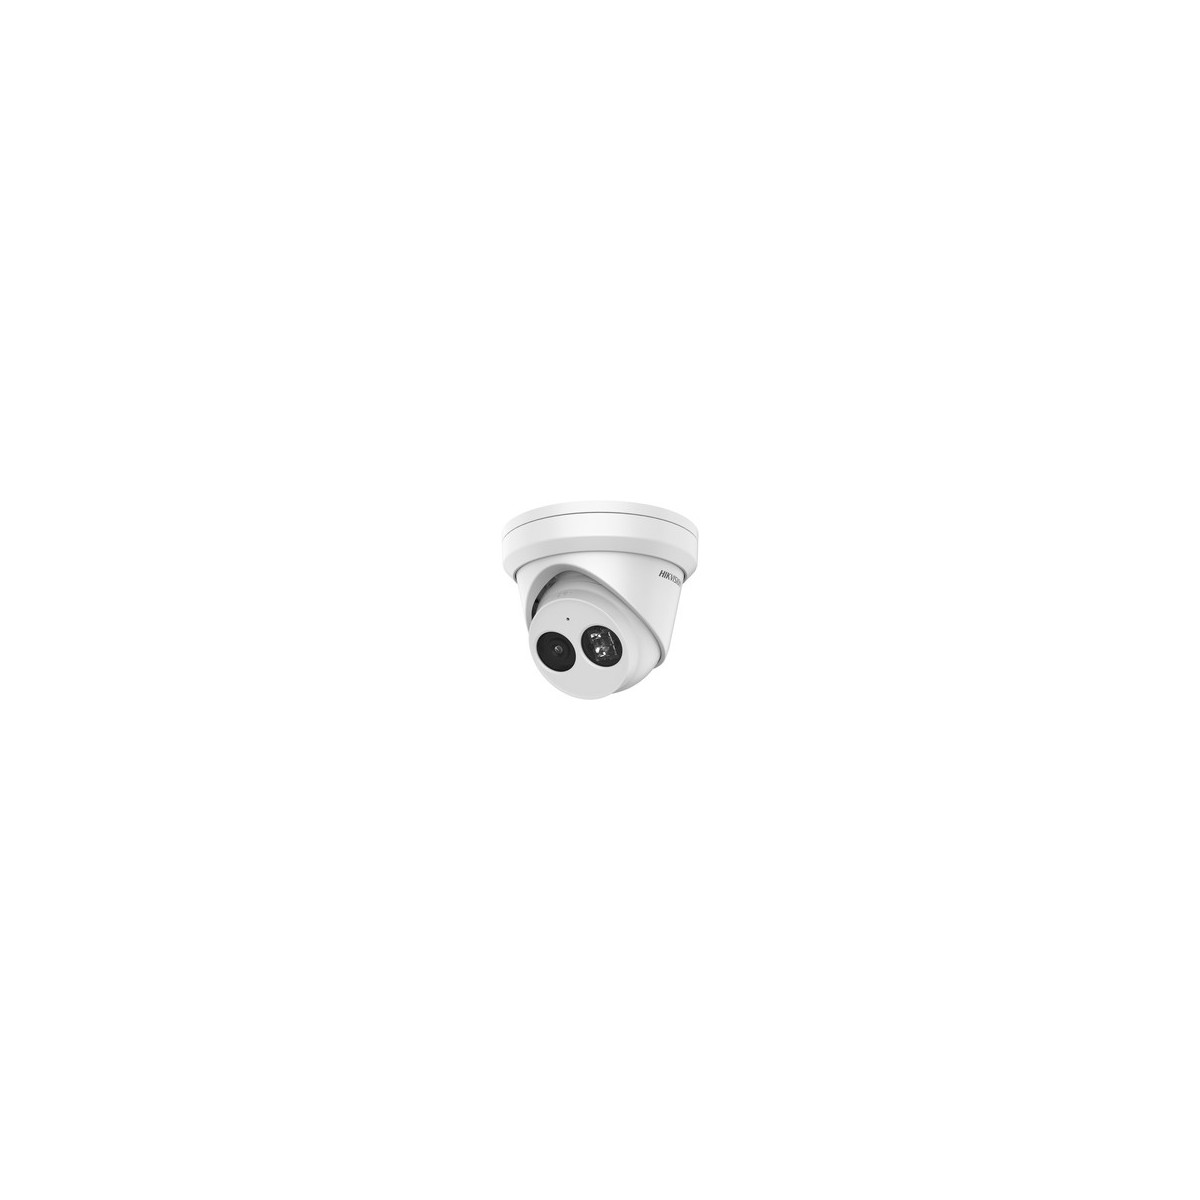 Hikvision Digital Technology DS-2CD3323G2-IU - IP security camera - Outdoor - Wired - Ceiling-wall - White - Turret